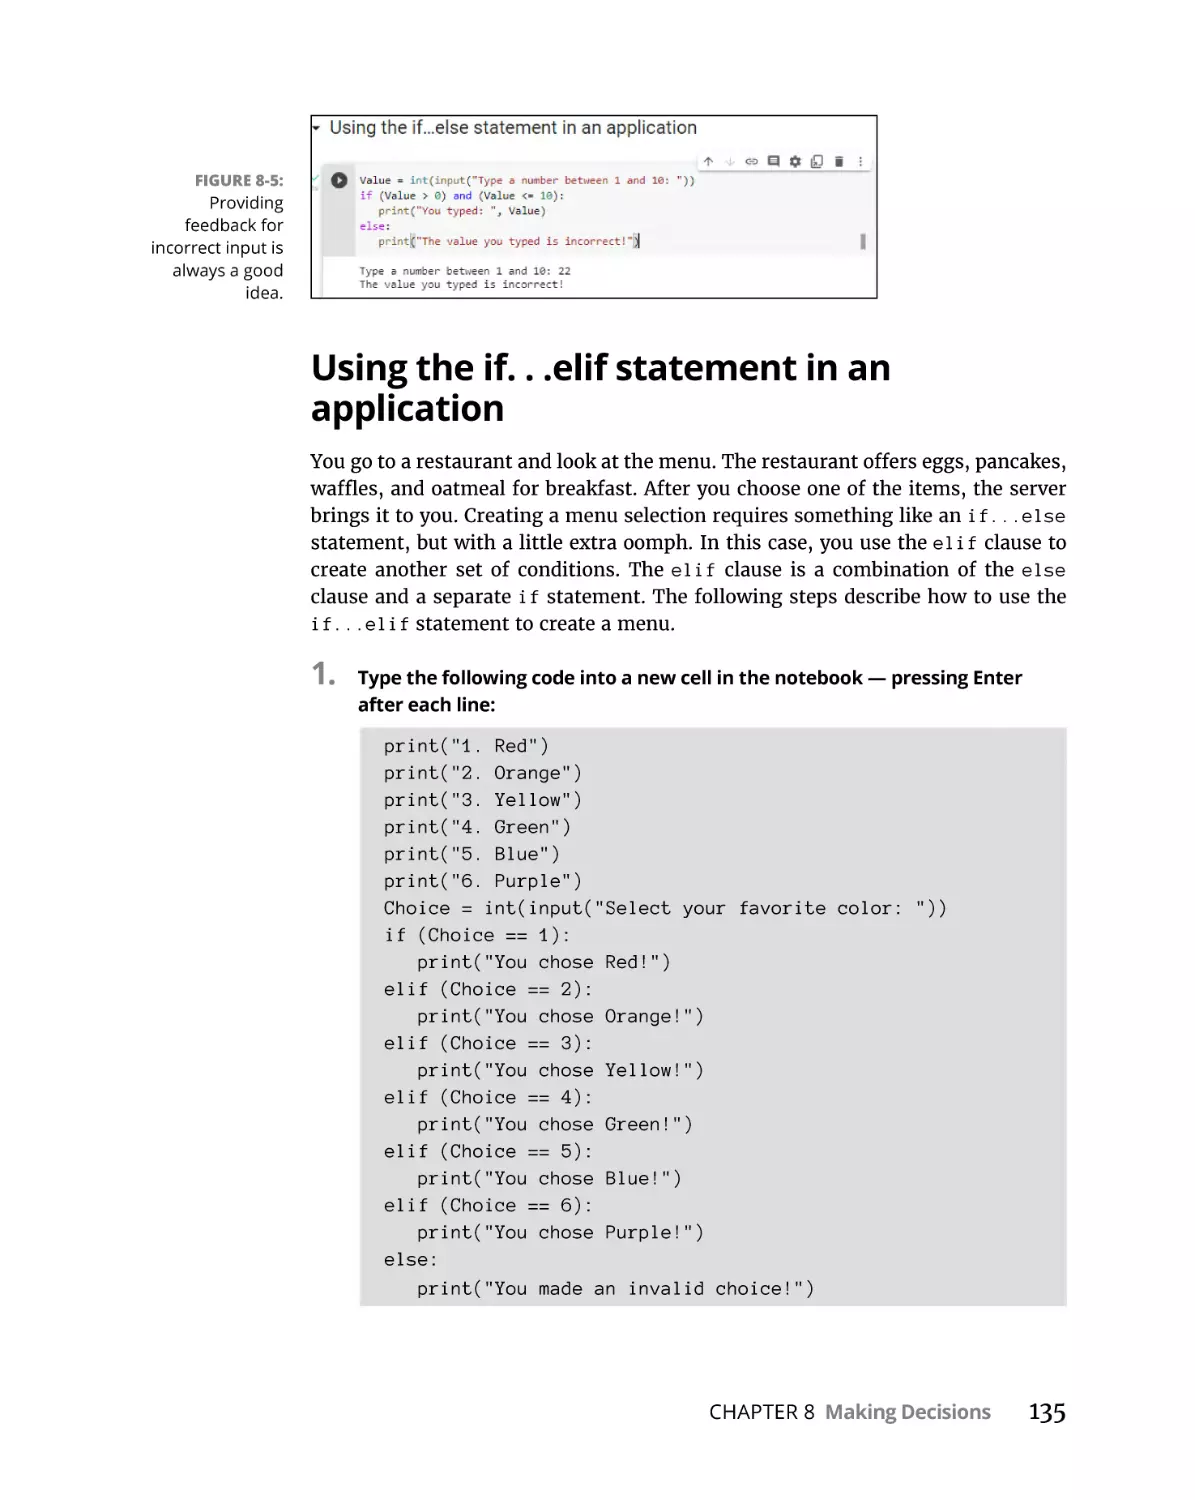 Using the if. . .elif statement in an application